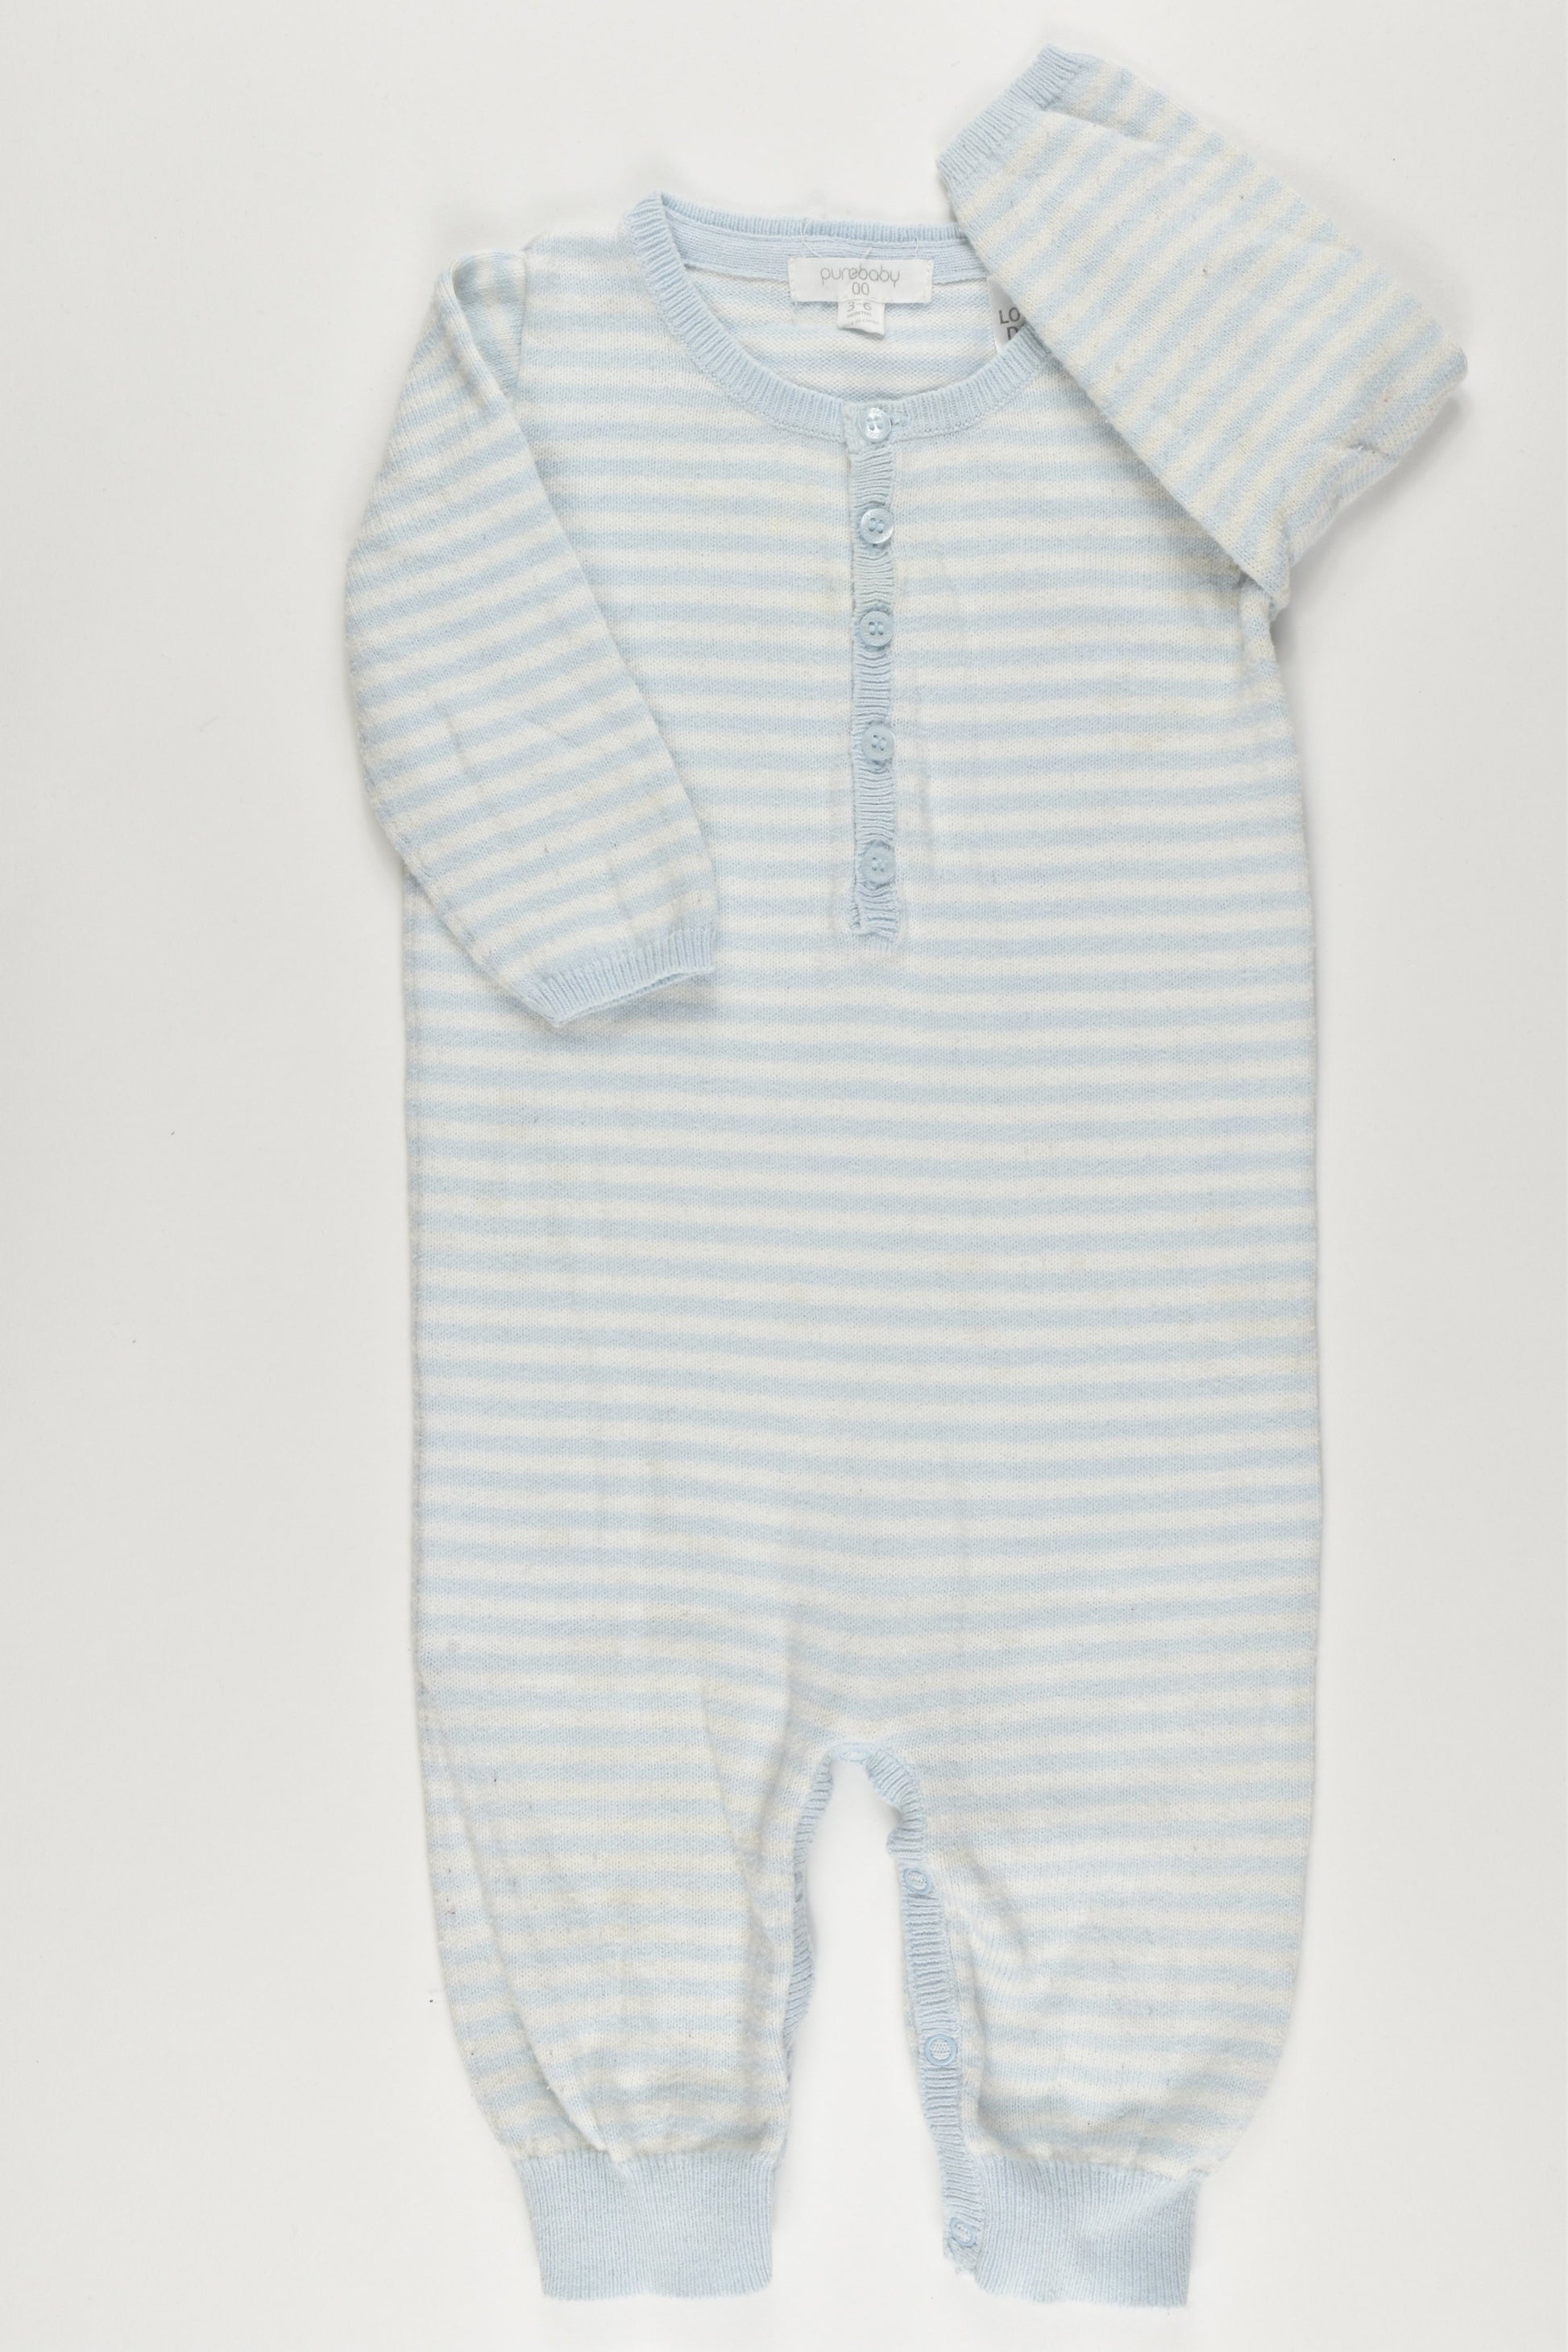 Purebaby Size 00 (3-6 months) Knitted Romper